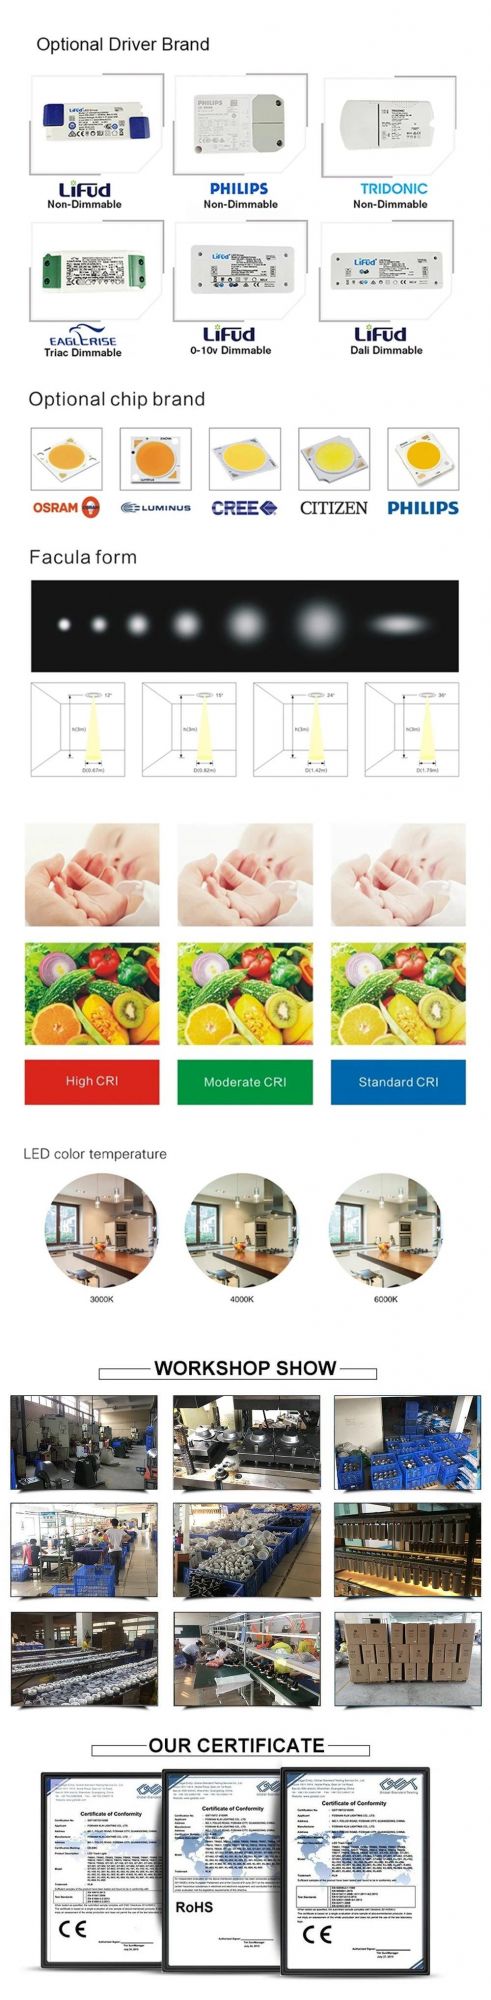 Home Decorate 25W LED COB Down Light Lamp Ceiling Indoor LED Lighting Shop Used Downlight